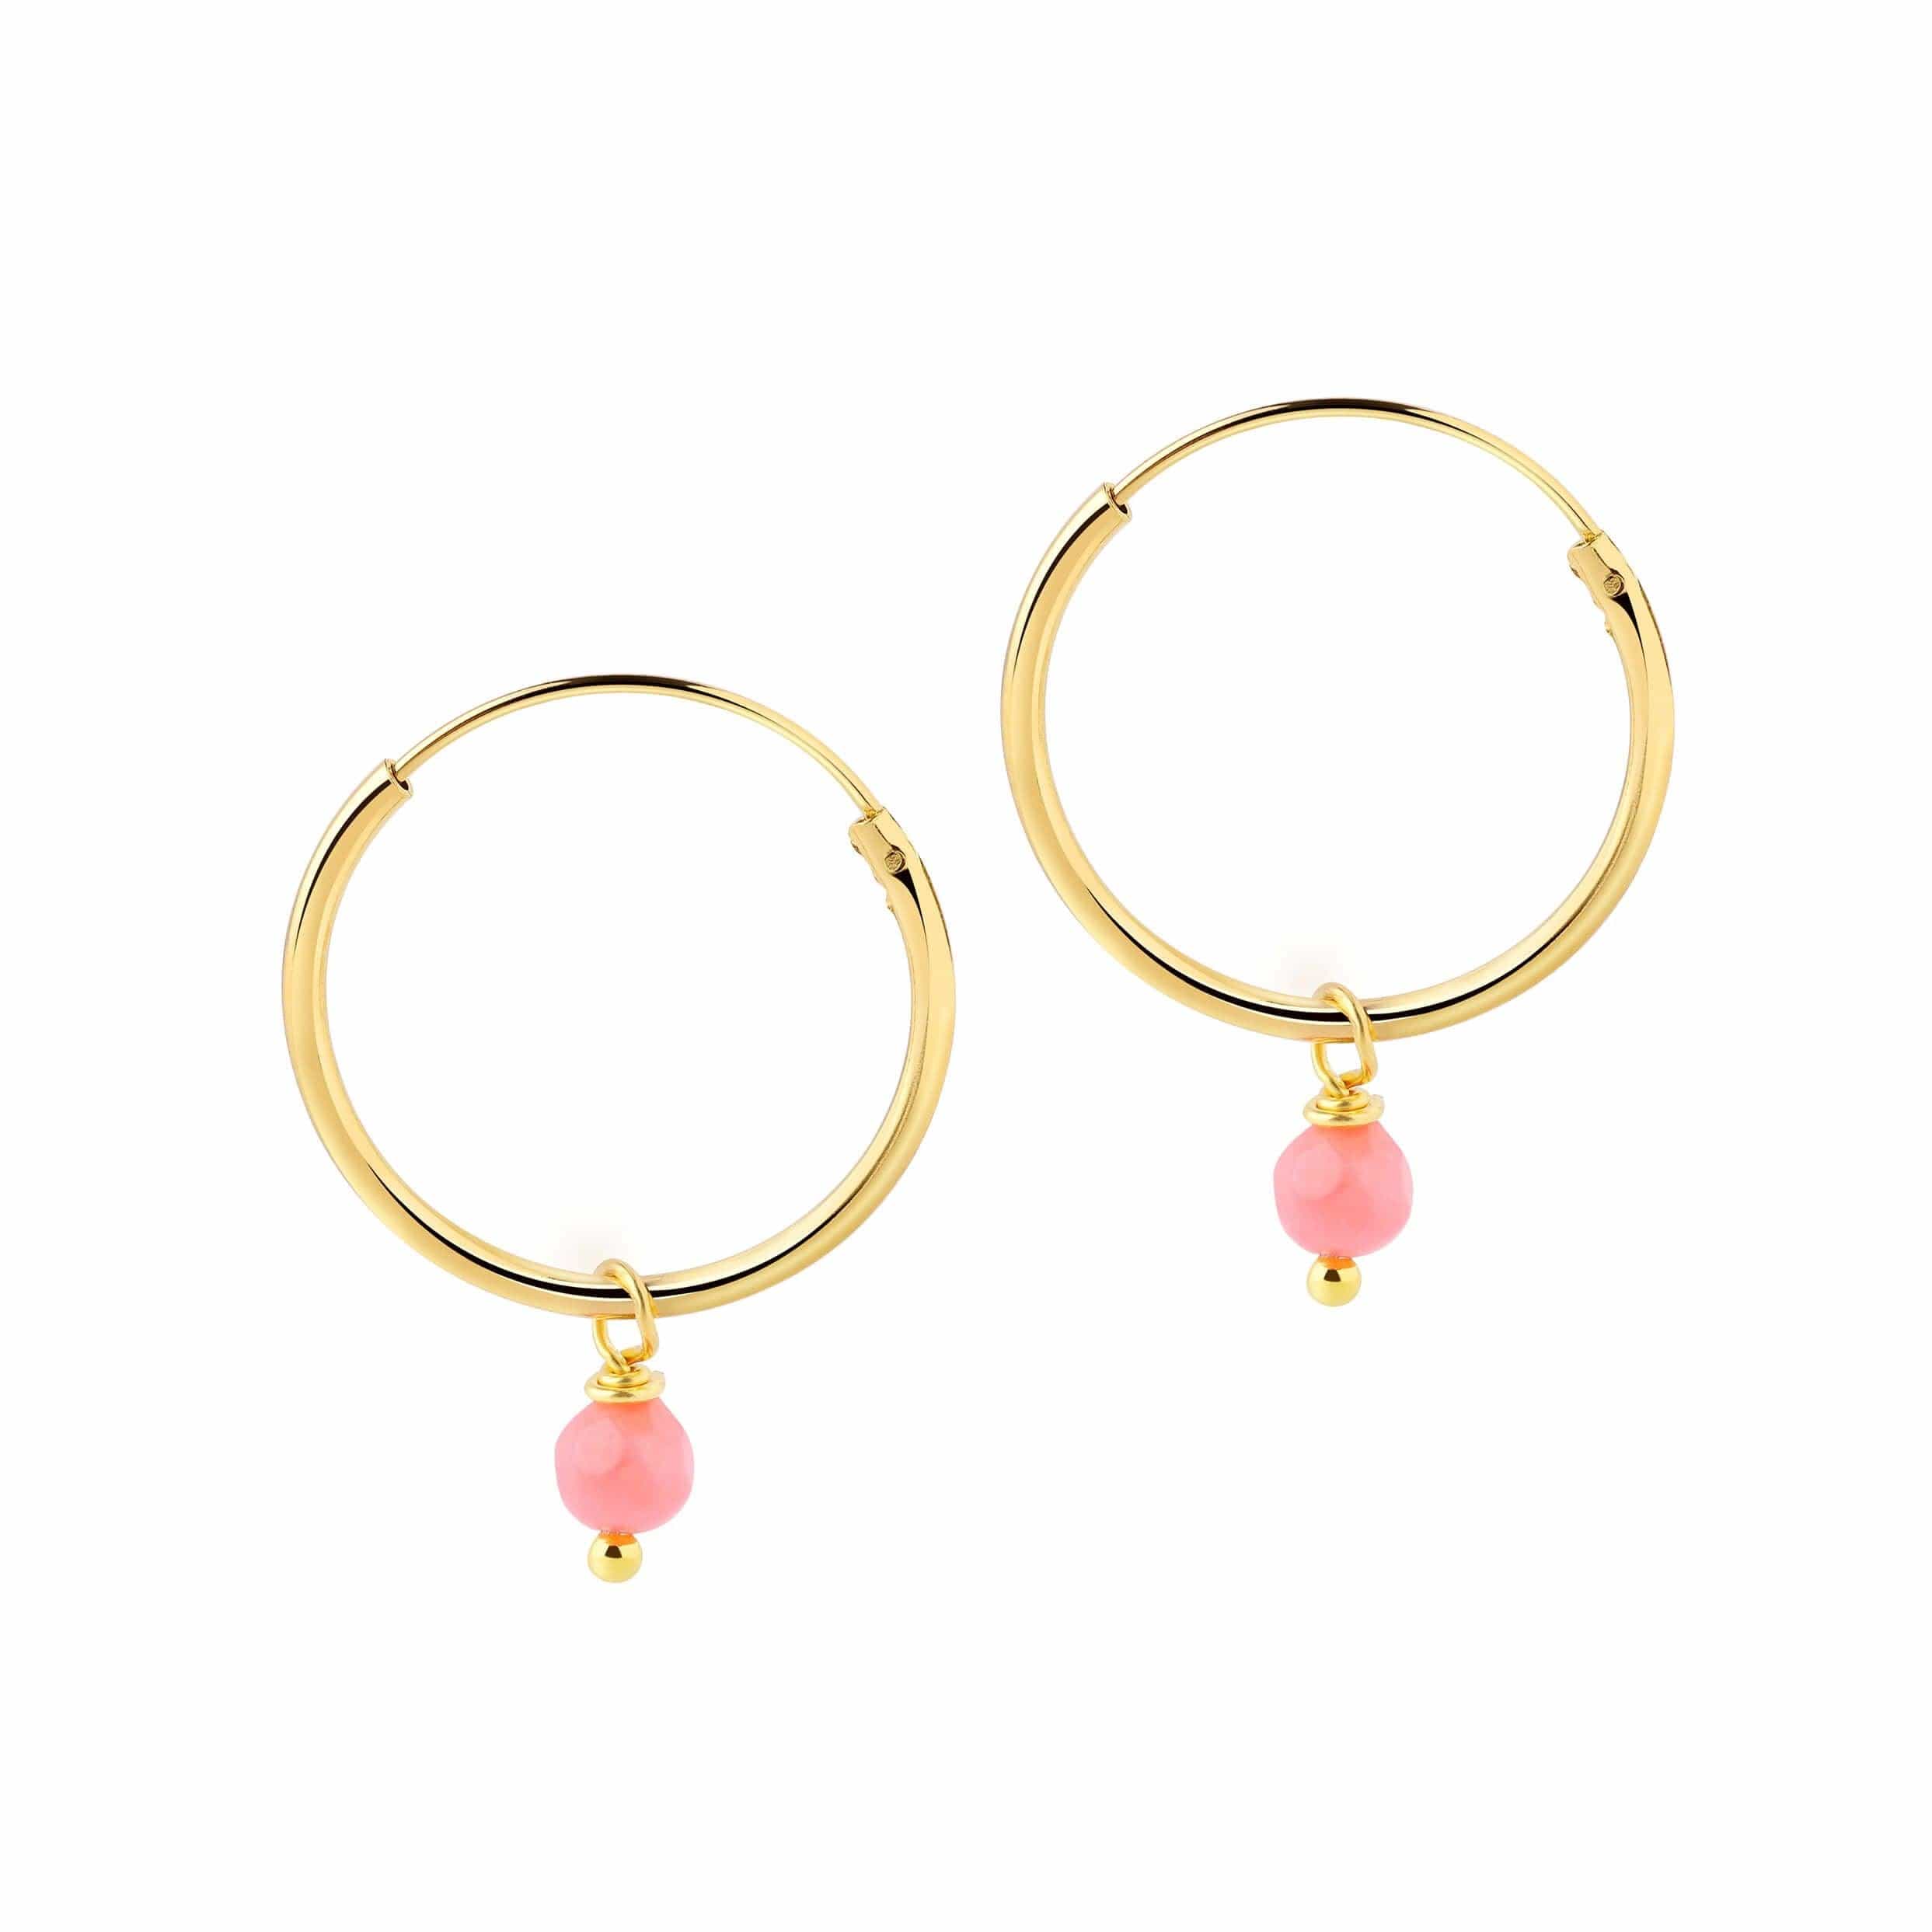 Gold Plated Hoop Earrings with Pink Stone